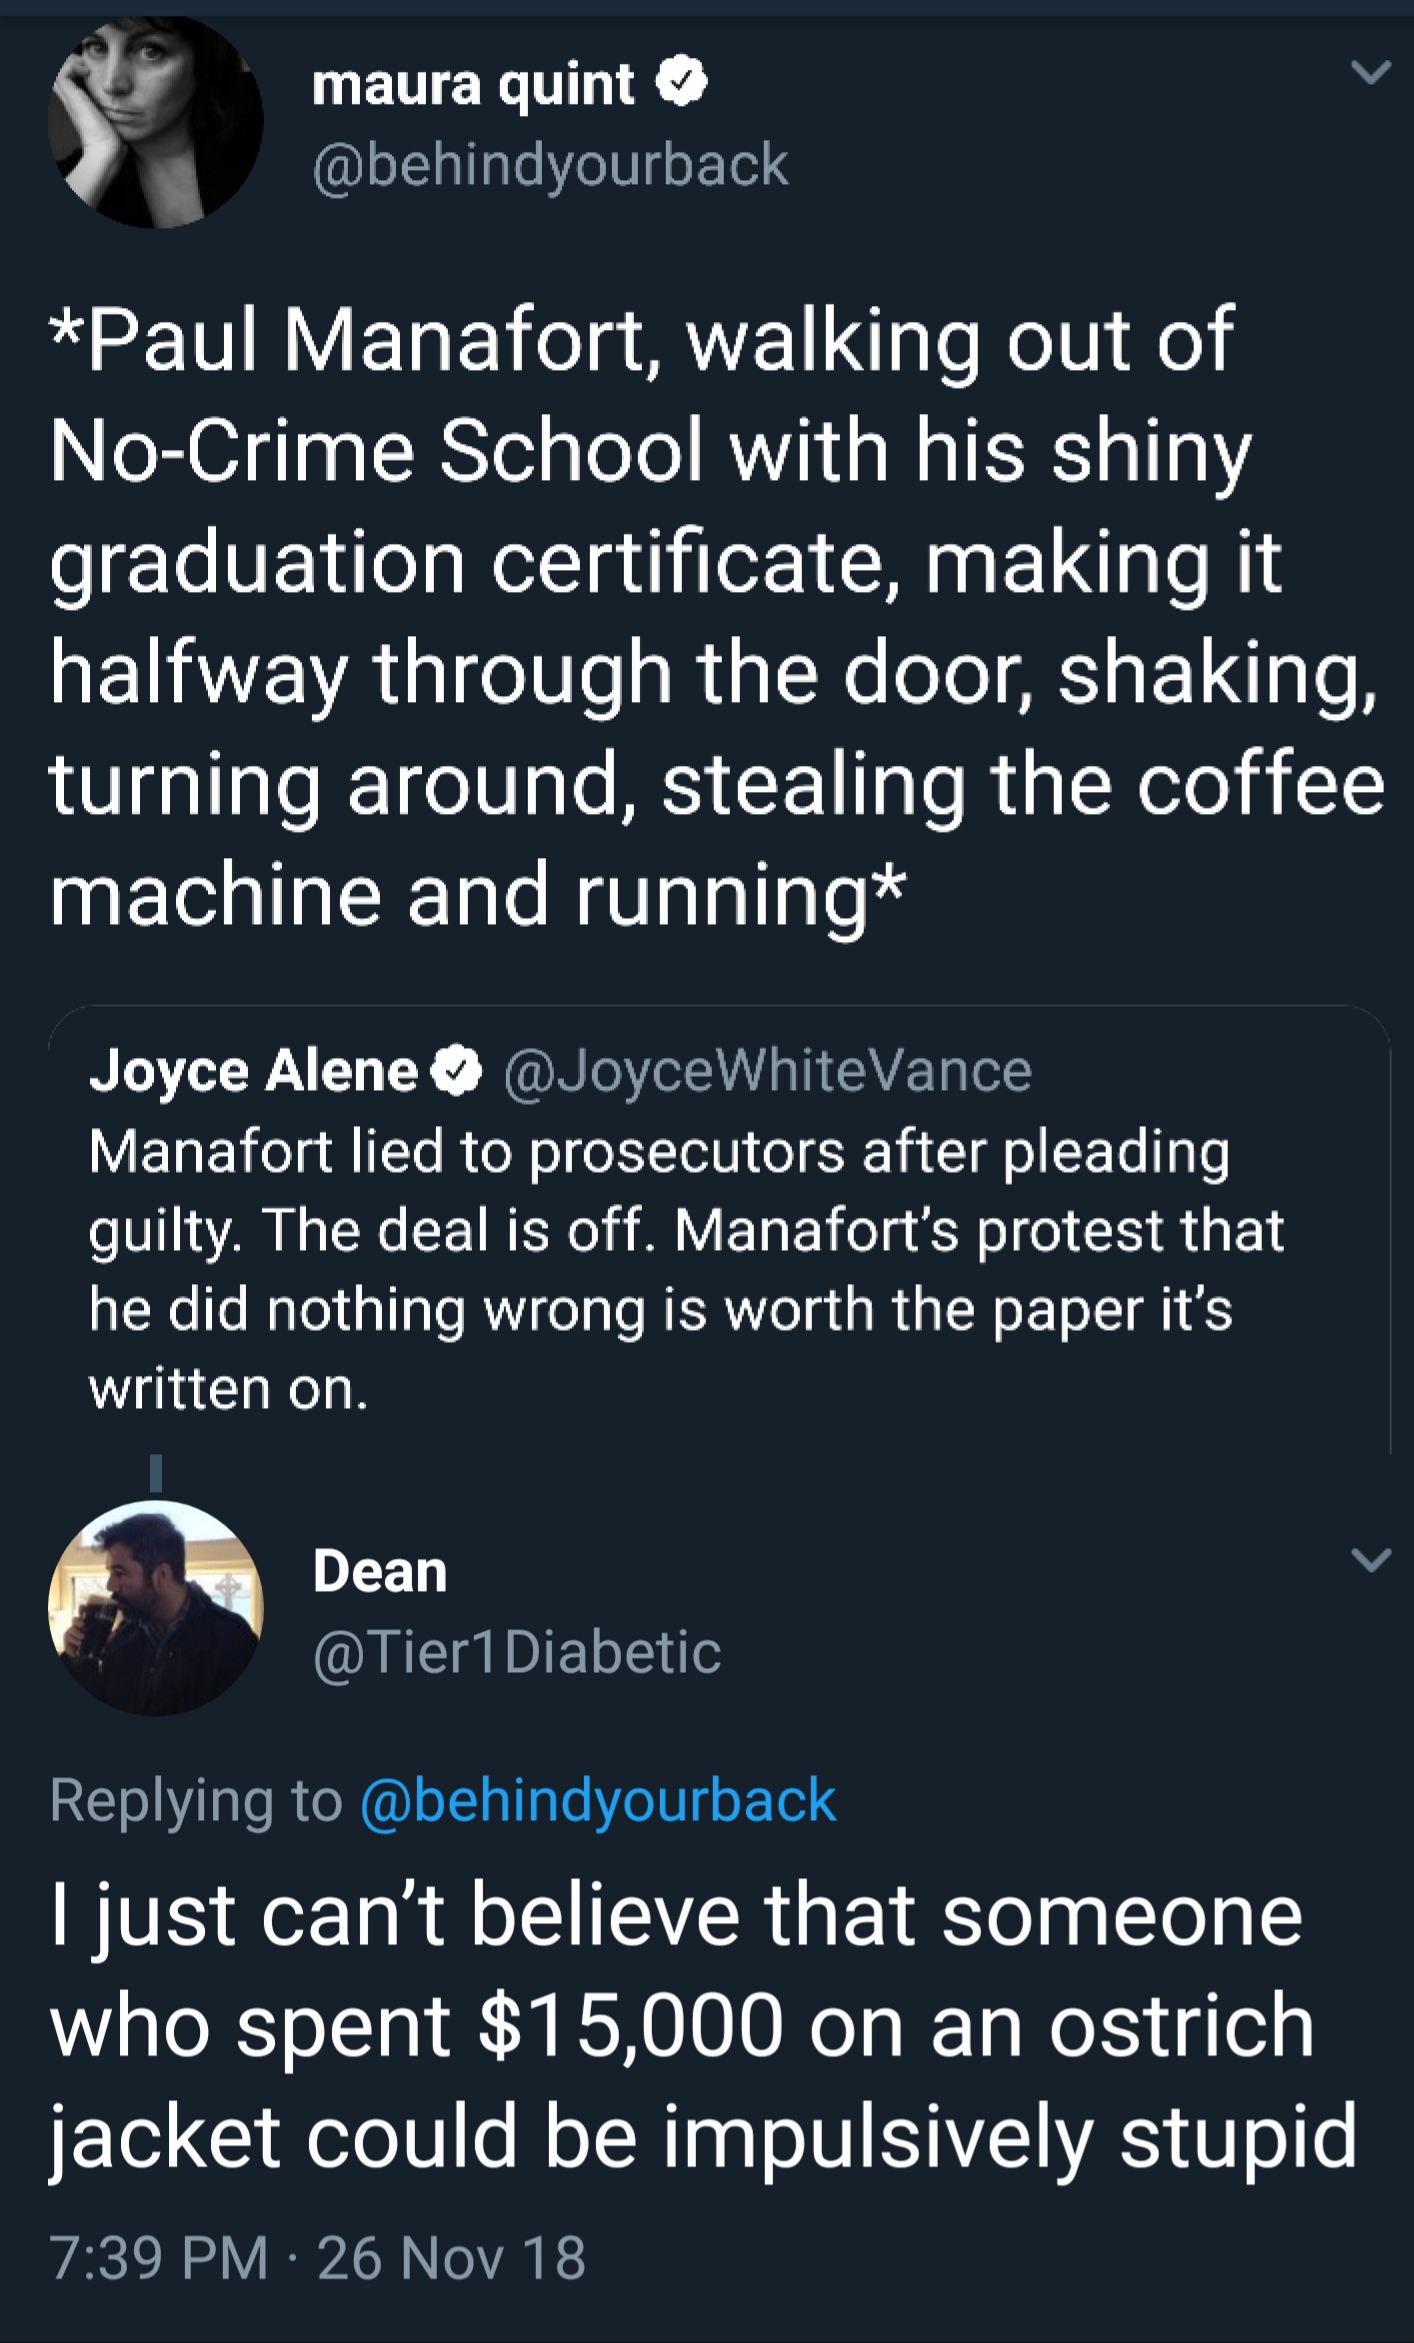 dank meme screenshot - maura quint Paul Manafort, walking out of NoCrime School with his shiny graduation certificate, making it halfway through the door, shaking, turning around, stealing the coffee machine and running Joyce Alene Manafort lied to prosec